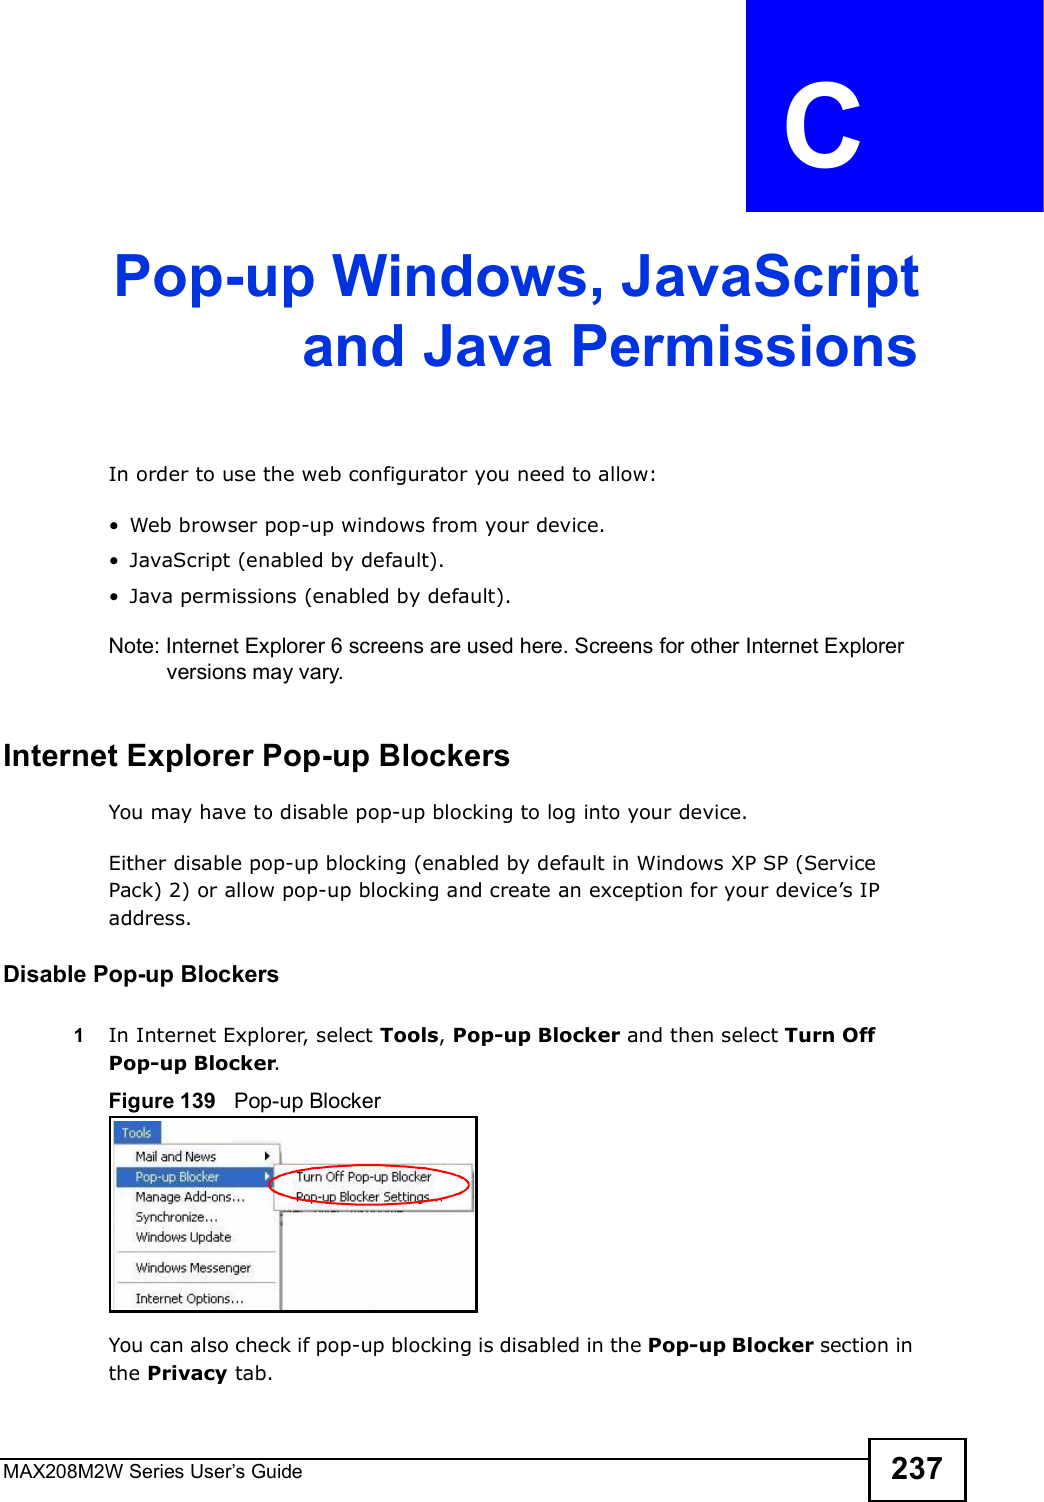 MAX208M2W Series User s Guide 237APPENDIX  C Pop-up Windows, JavaScriptand Java PermissionsIn order to use the web configurator you need to allow:!Web browser pop-up windows from your device.!JavaScript (enabled by default).!Java permissions (enabled by default).Note: Internet Explorer 6 screens are used here. Screens for other Internet Explorer versions may vary.Internet Explorer Pop-up BlockersYou may have to disable pop-up blocking to log into your device. Either disable pop-up blocking (enabled by default in Windows XP SP (Service Pack) 2) or allow pop-up blocking and create an exception for your device s IP address.Disable Pop-up Blockers1In Internet Explorer, select Tools, Pop-up Blocker and then select Turn Off Pop-up Blocker. Figure 139   Pop-up BlockerYou can also check if pop-up blocking is disabled in the Pop-up Blocker section in the Privacy tab. 